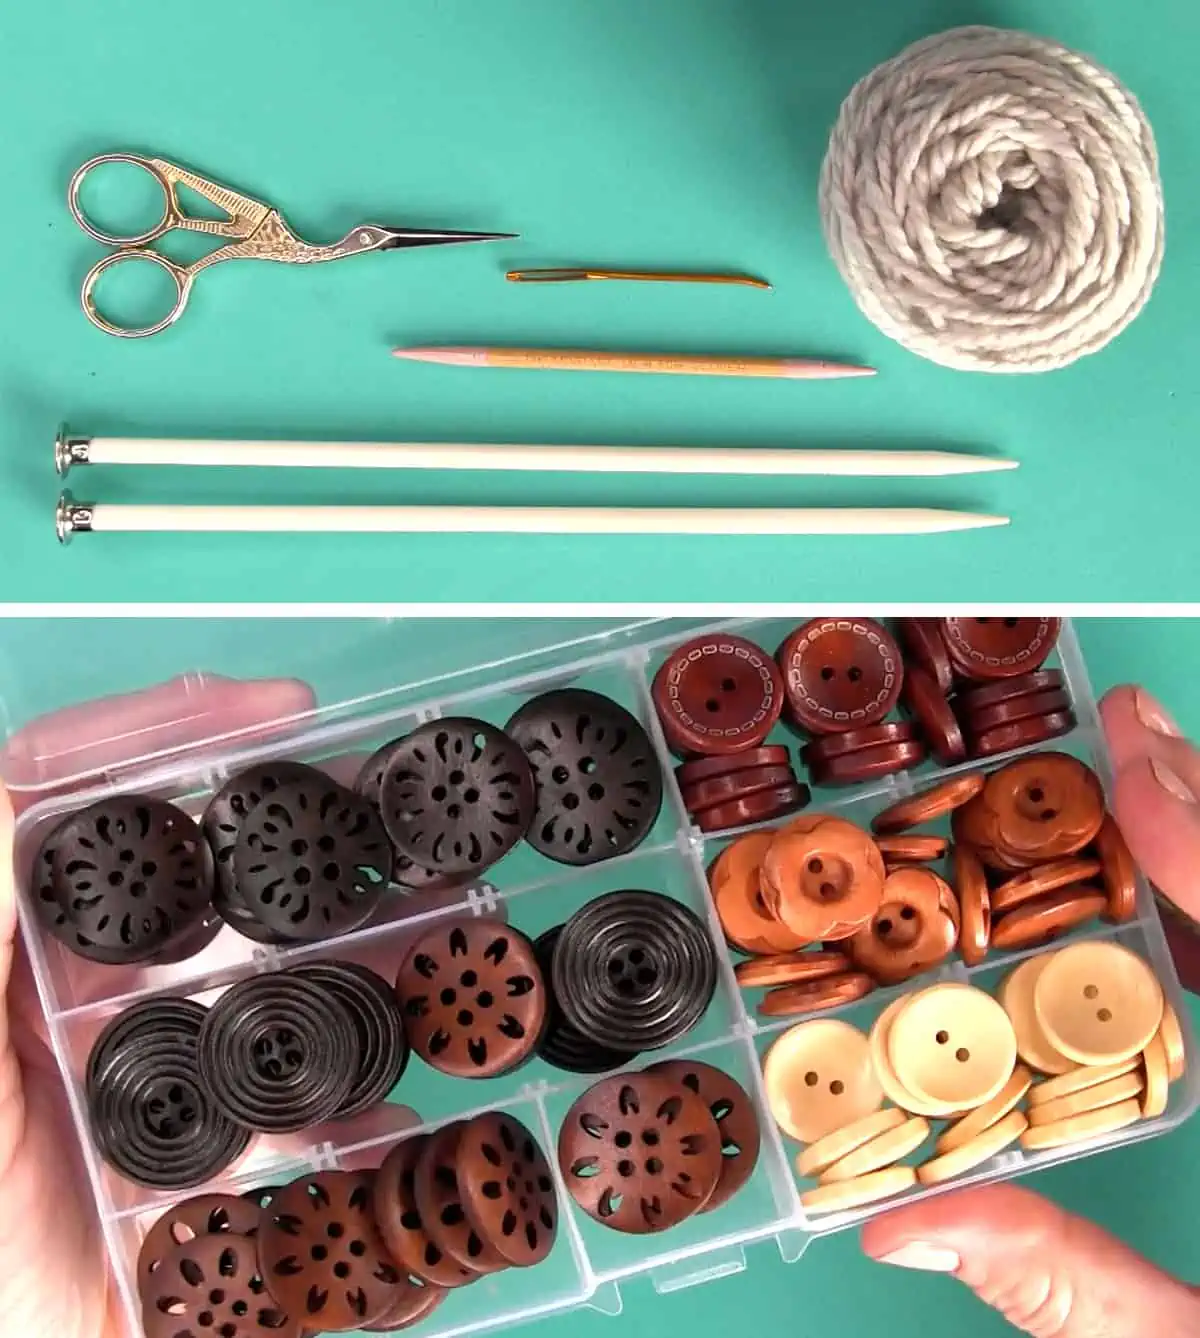 Knitting supplies of yarn, knitting needles, tapestry needle, cable needle, and craft buttons.